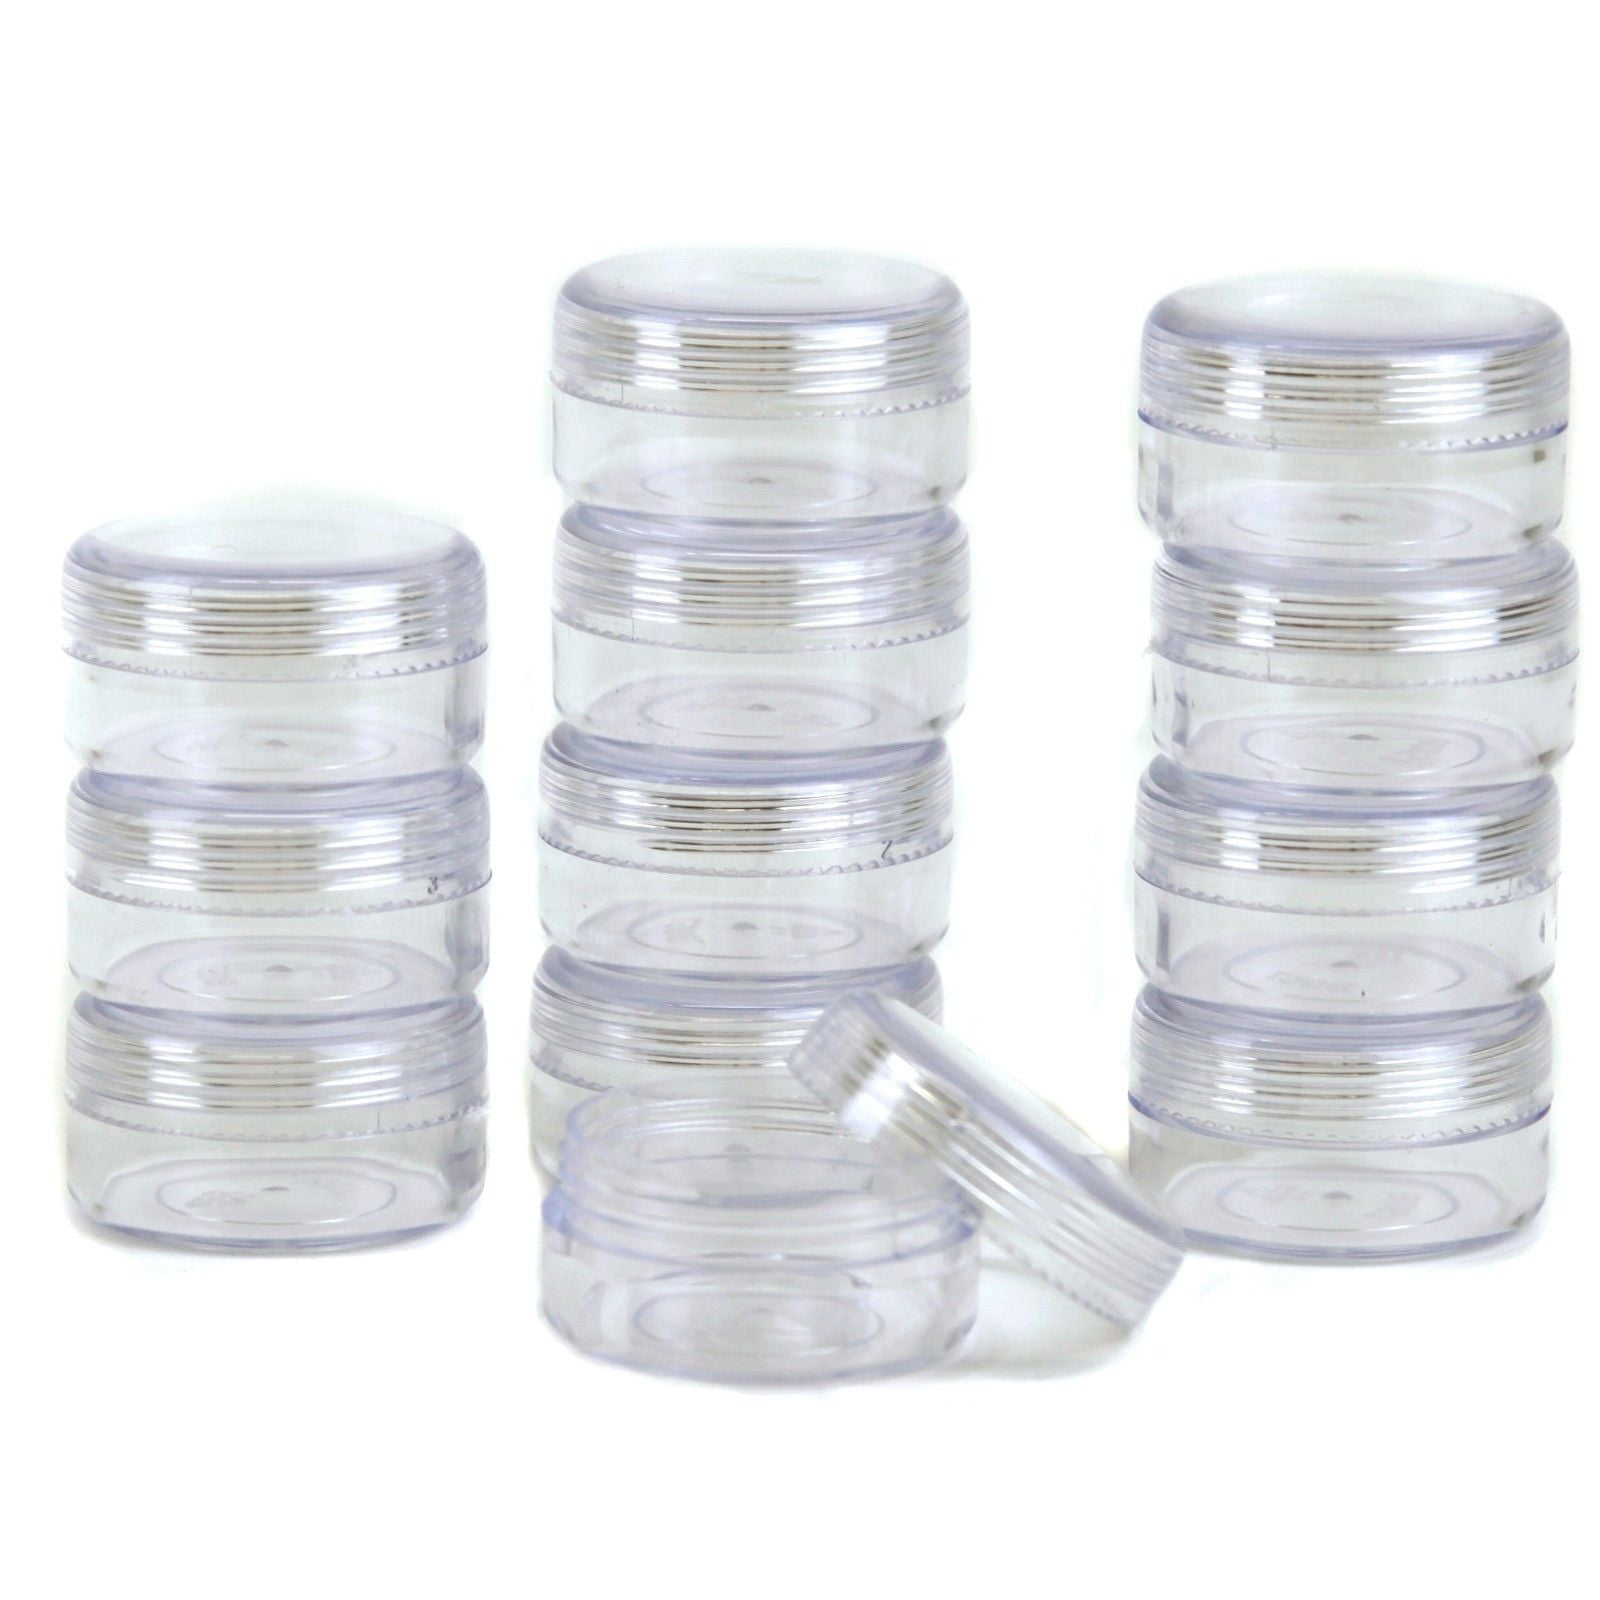 Details about   Interlocking Round Storage Containers with Screw-Top Lids Small Medium Large XL